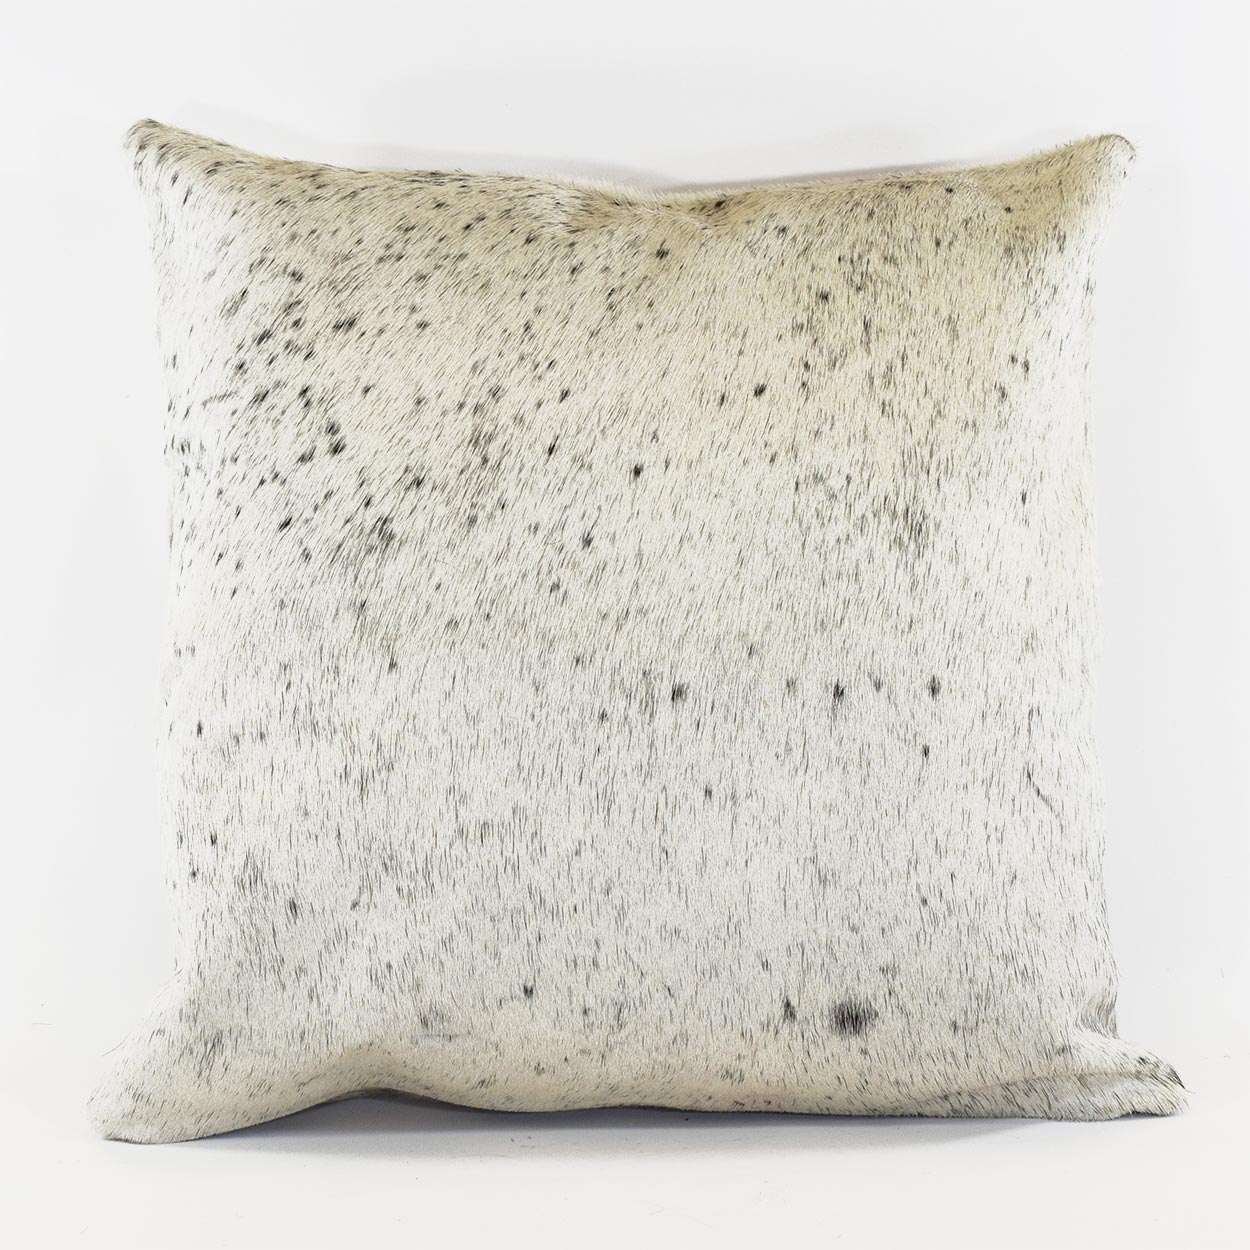 322028 - 20in x 20in Cowhide Pillow - Salt and Pepper Black - Mostly White